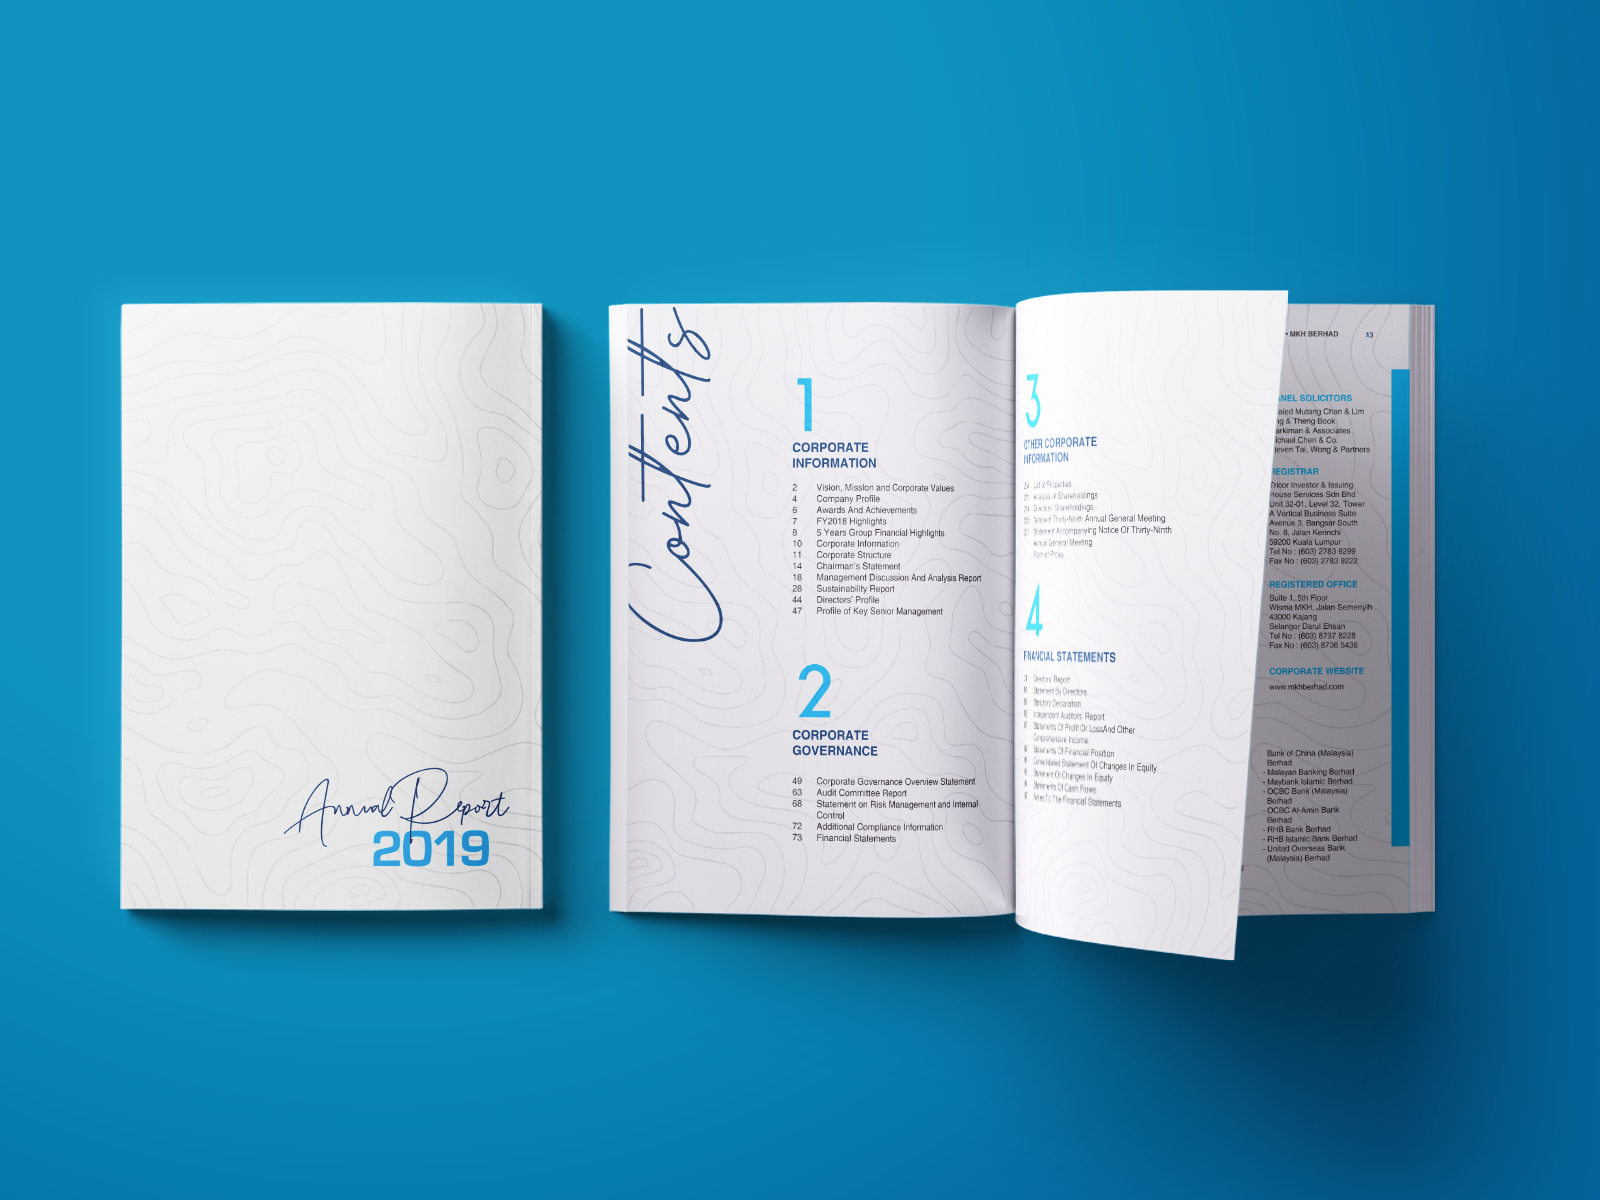 Download Book Mockup Annual Report 2019 By Noor Asyikin On Dribbble